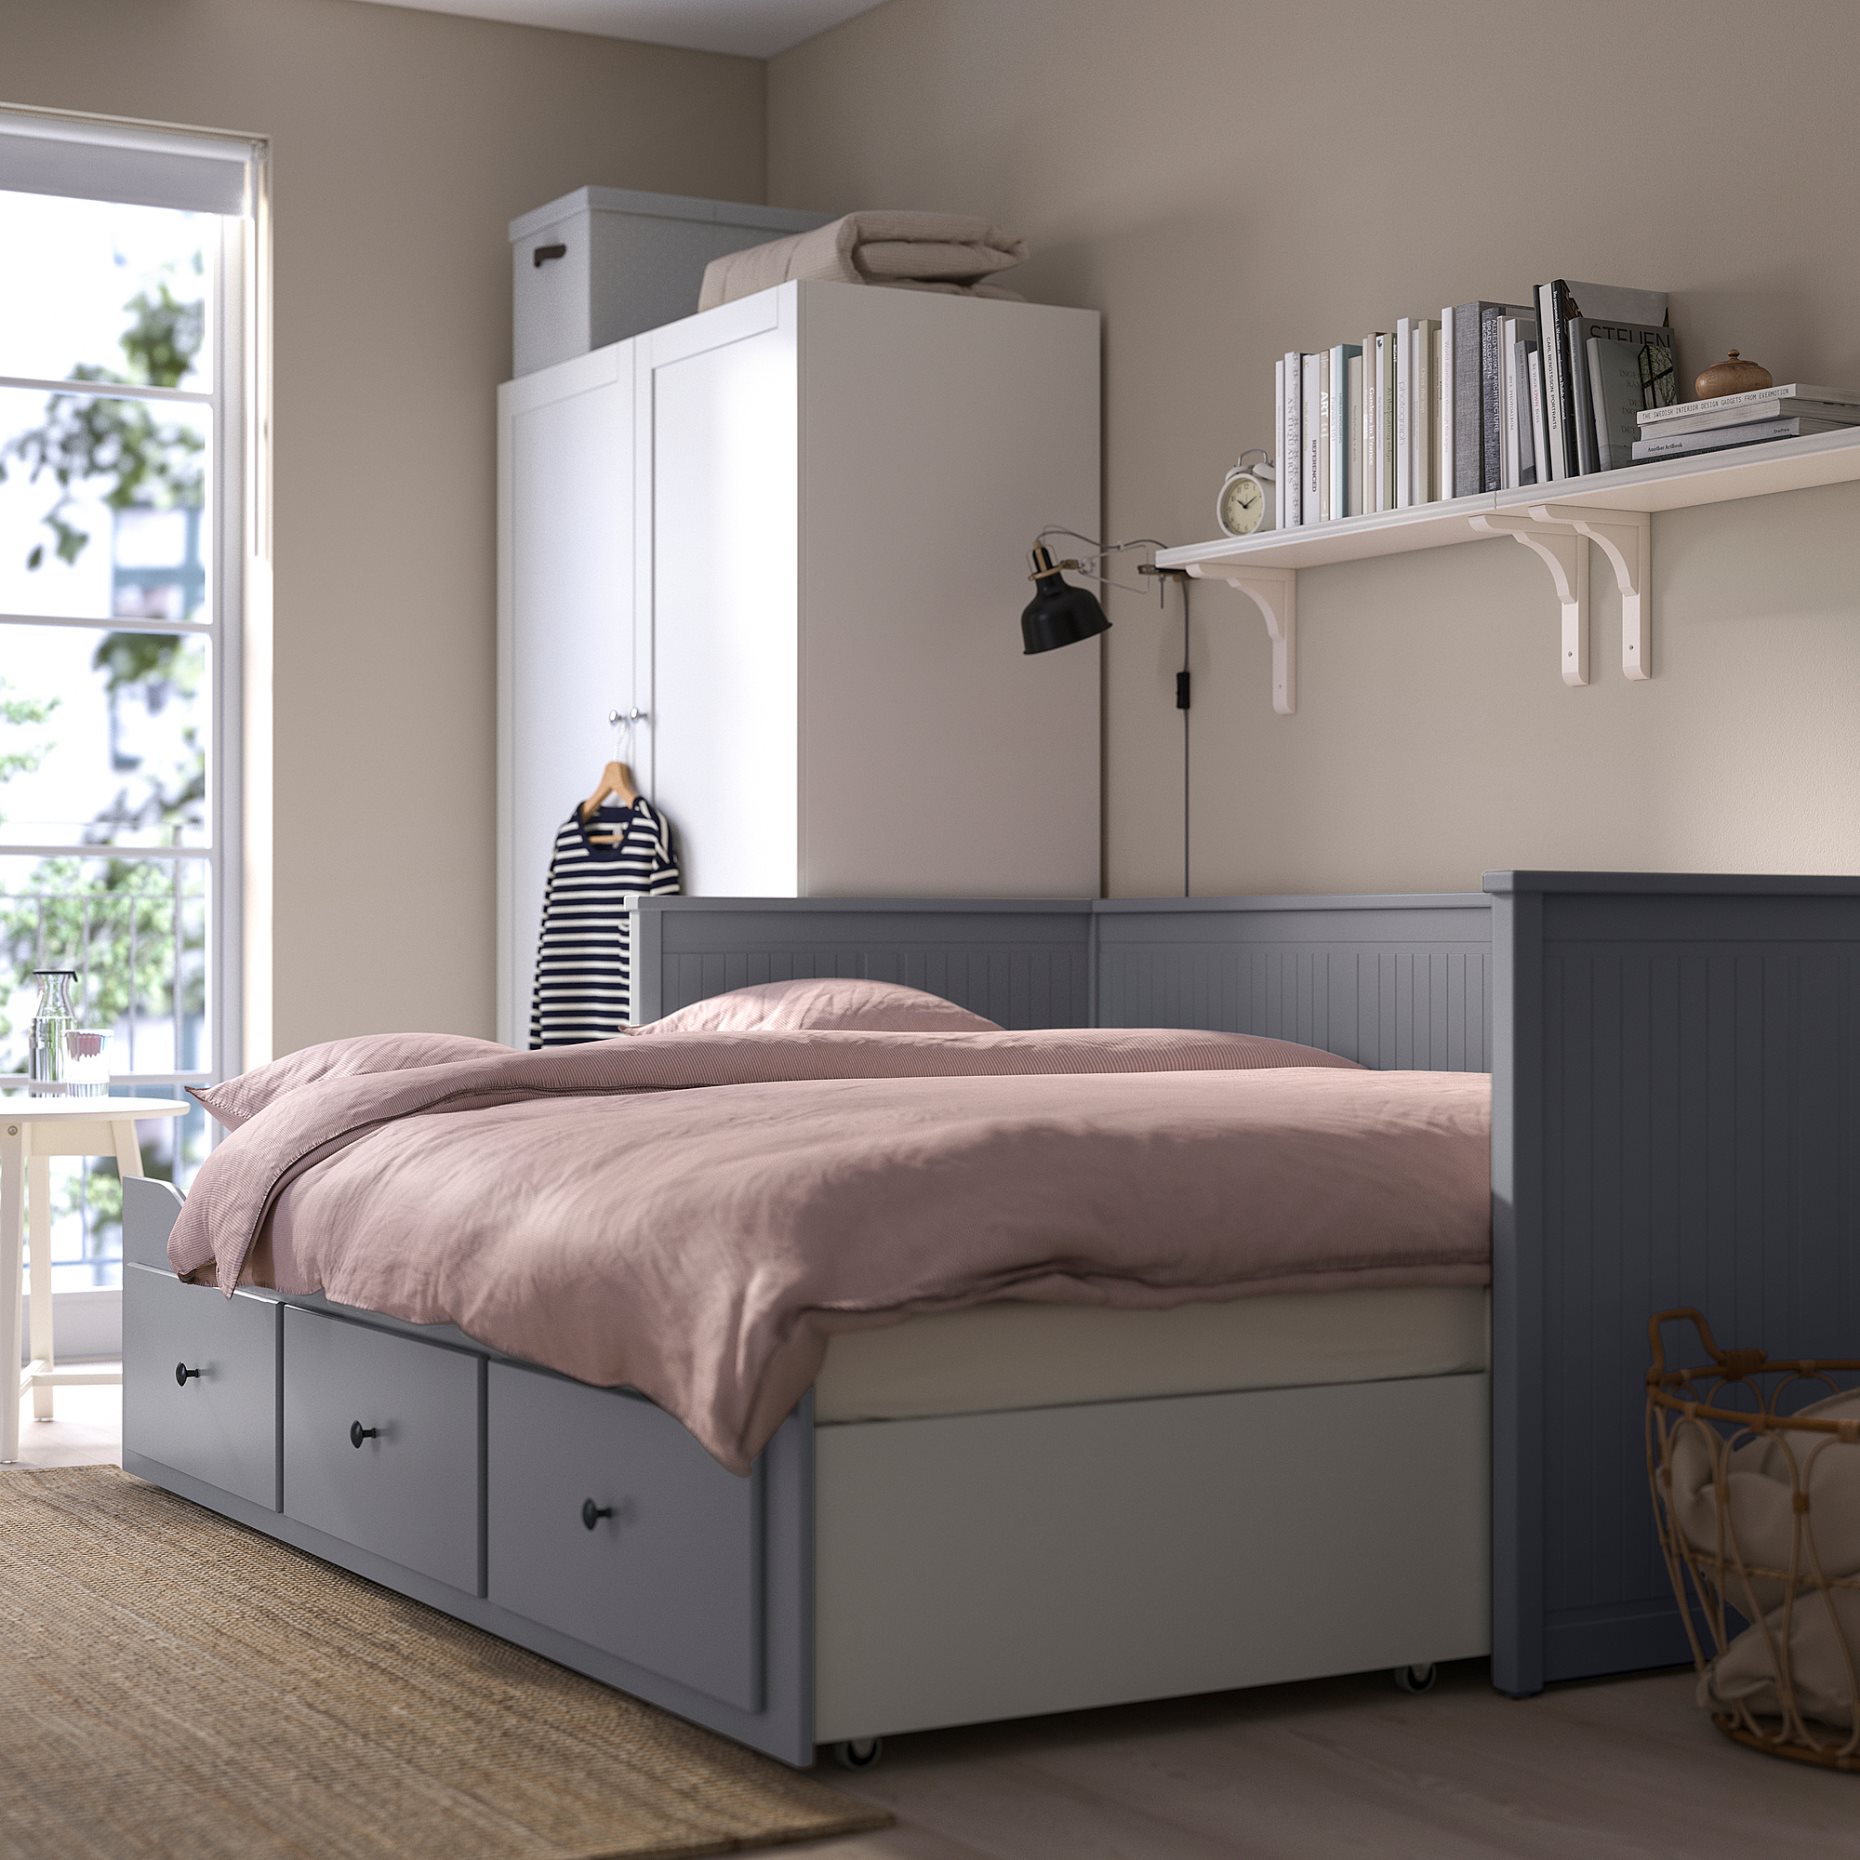 HEMNES, day-bed frame with 3 drawers, 80x200 cm, 603.722.76